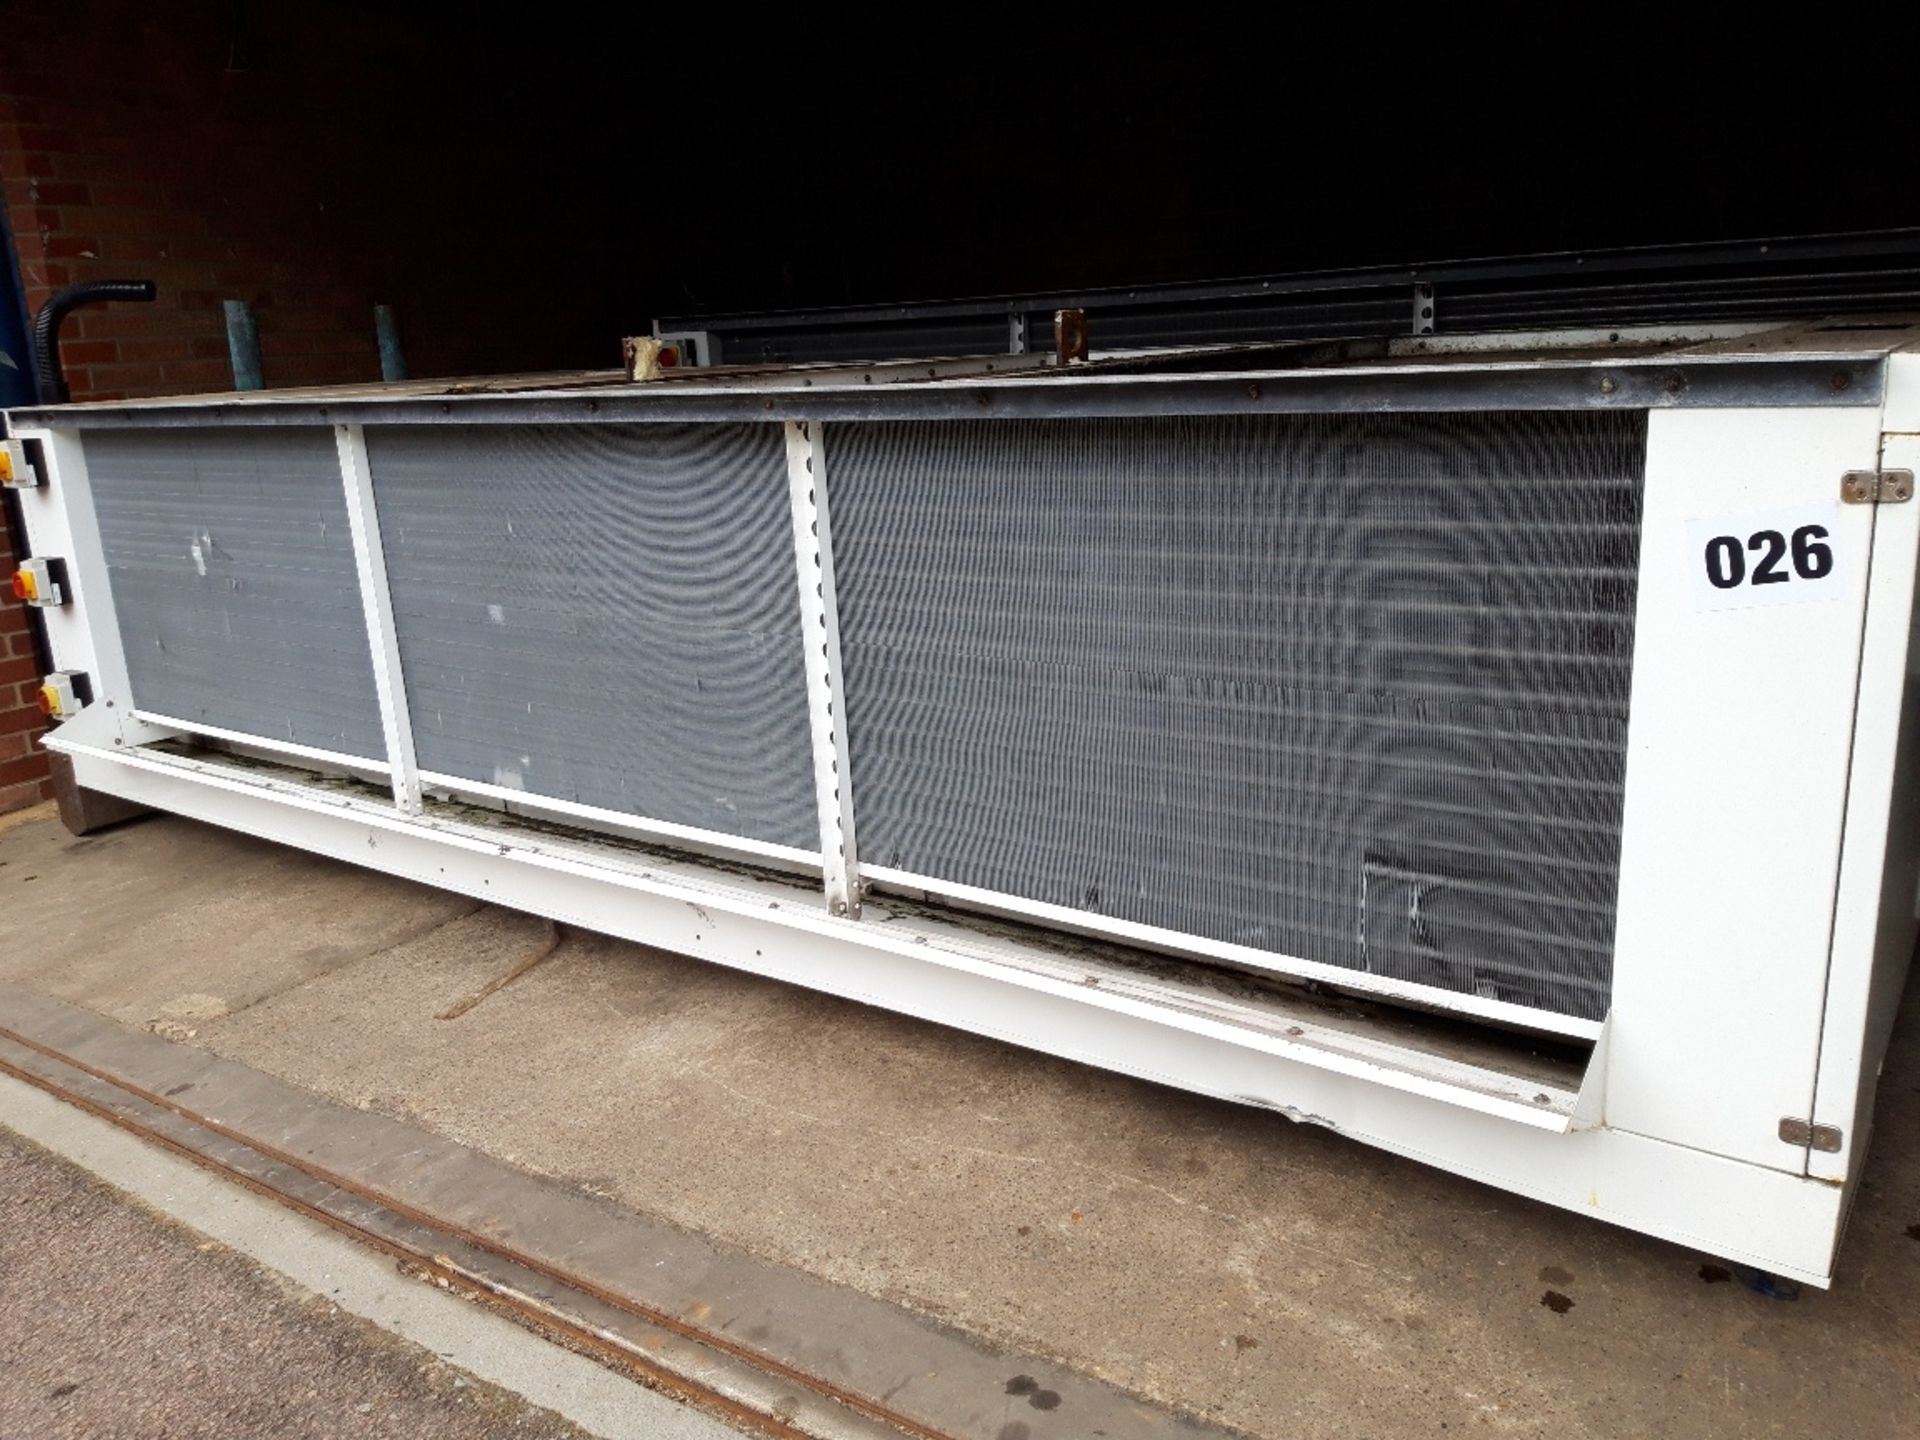 Evaporator Model DDL6 - 180 by Heating + Cooling Coils. Lift out £80.was working in factory .